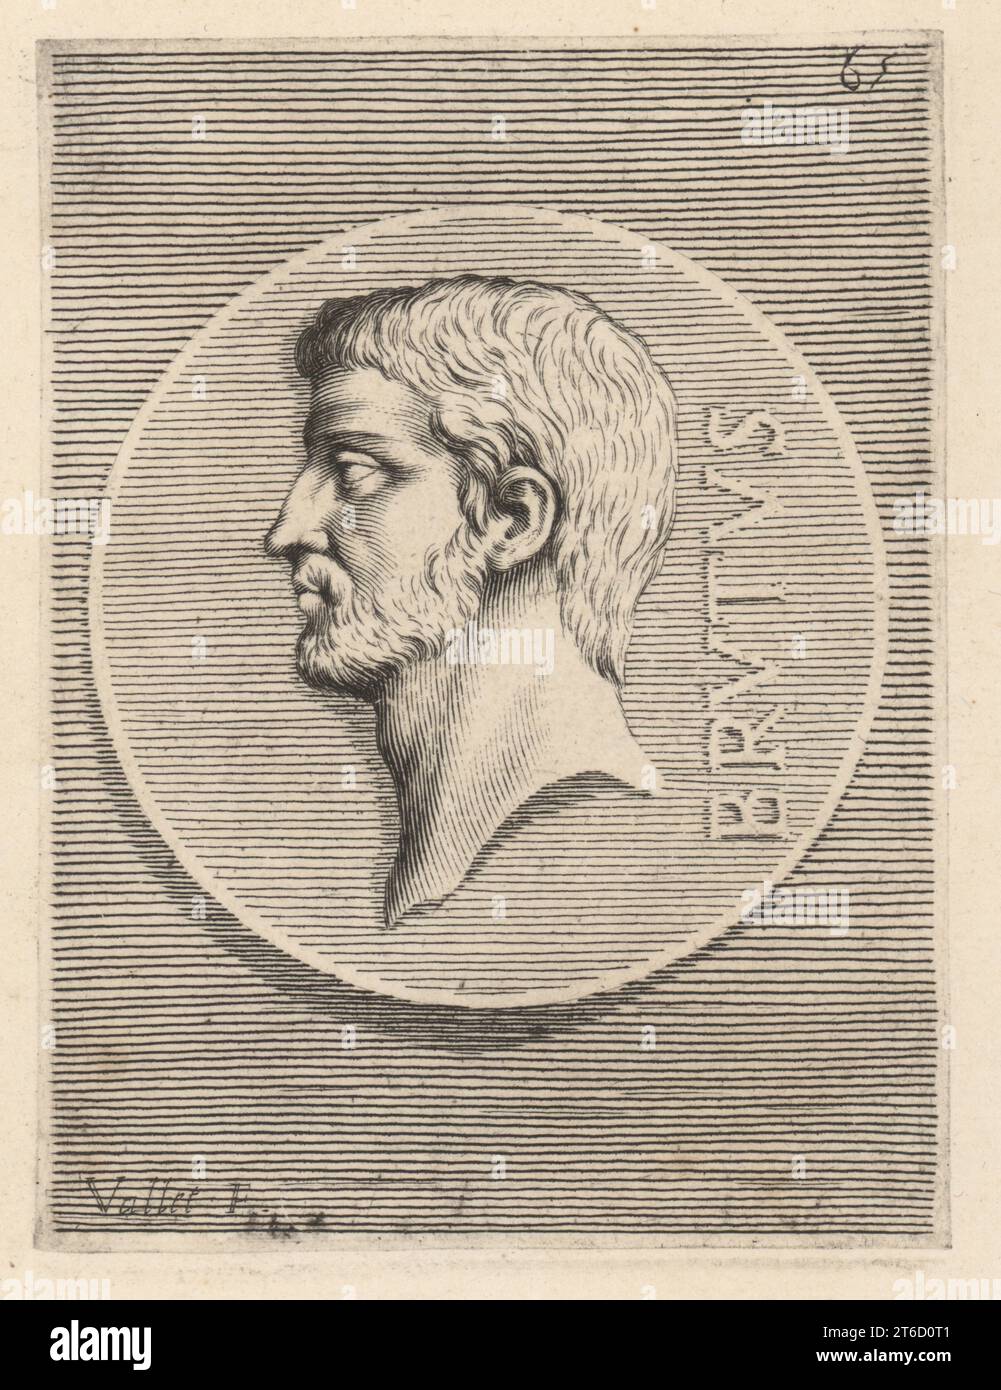 Lucius Junius Brutus, semi-legendary founder of the Roman Republic, and traditionally one of its first consuls in 509 BC. From a silver coin. Bruto. Copperplate engraving by Guillaume Vallet after Giovanni Angelo Canini from Iconografia, cioe disegni d'imagini de famosissimi monarchi, regi, filososi, poeti ed oratori dell' Antichita, Drawings of images of famous monarchs, kings, philosophers, poets and orators of Antiquity, Ignatio deLazari, Rome, 1699. Stock Photo